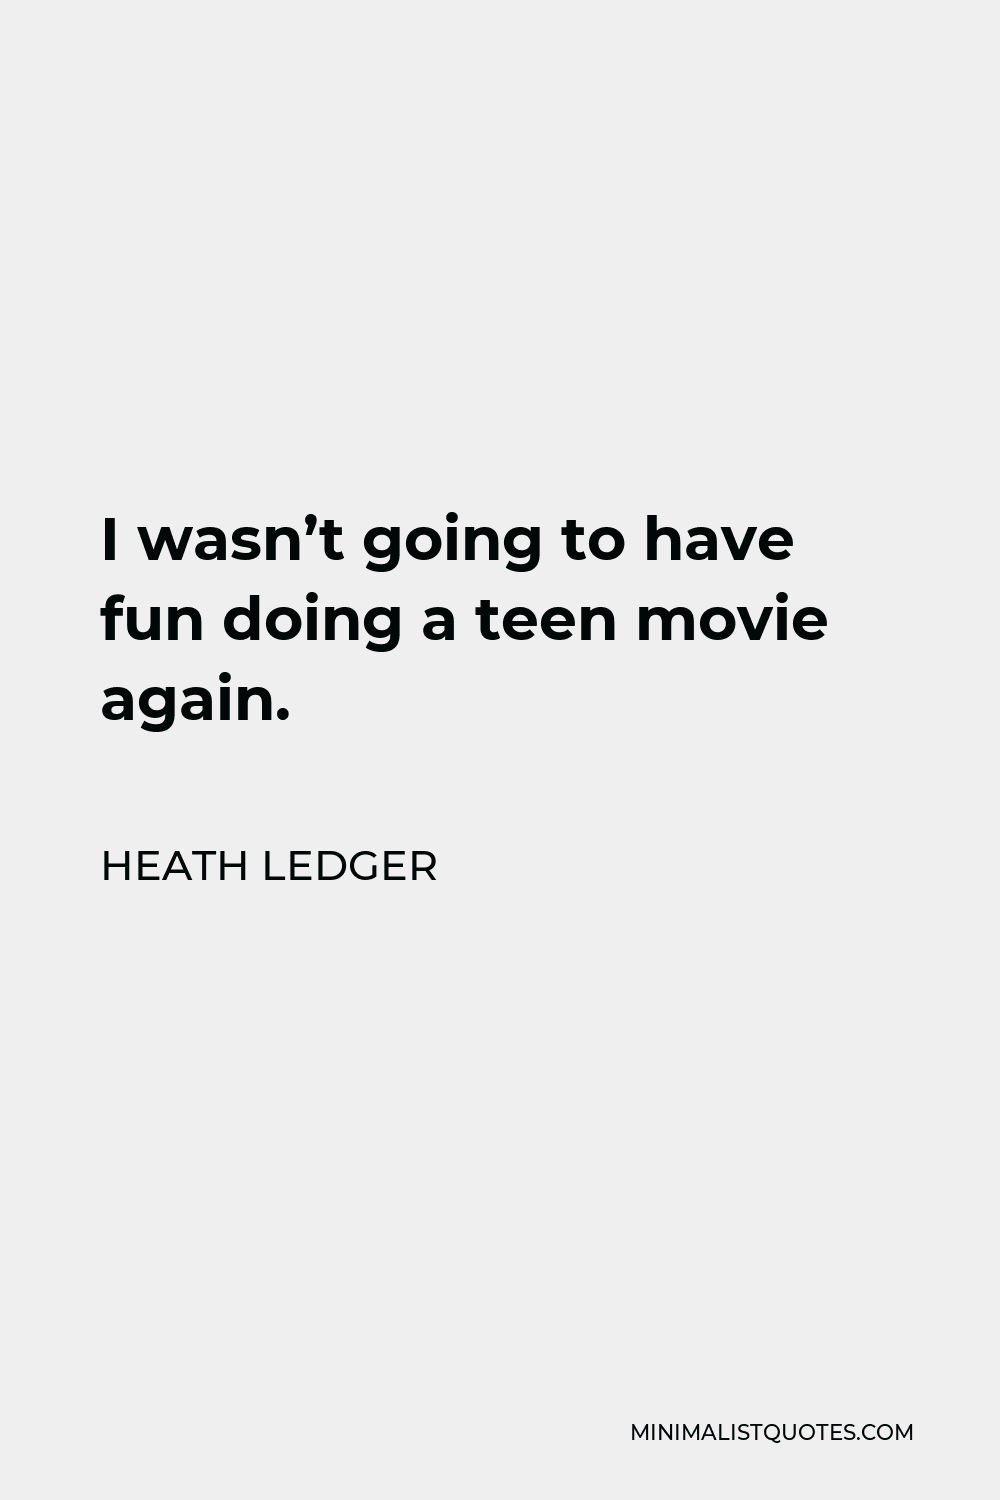 Heath Ledger Quote - I wasn’t going to have fun doing a teen movie again.